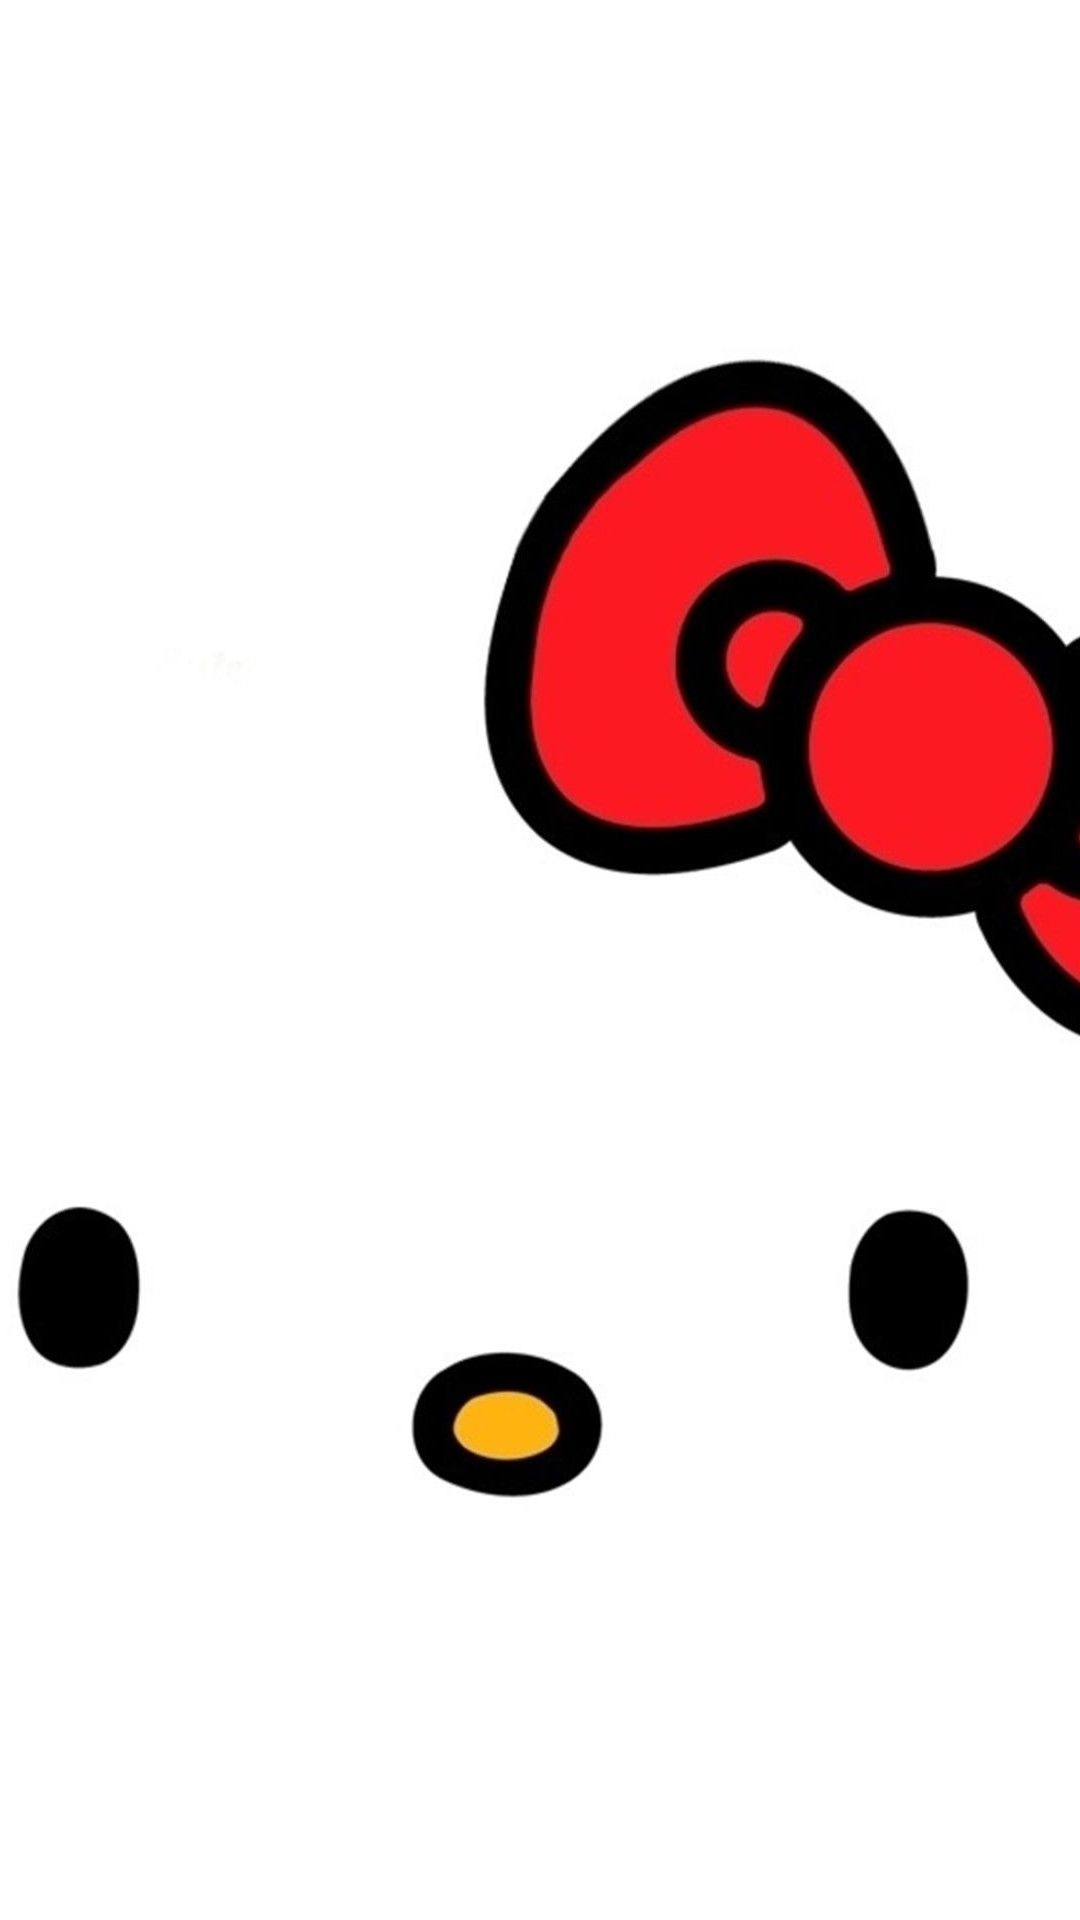 Cute Hello Kitty - Face In White Background